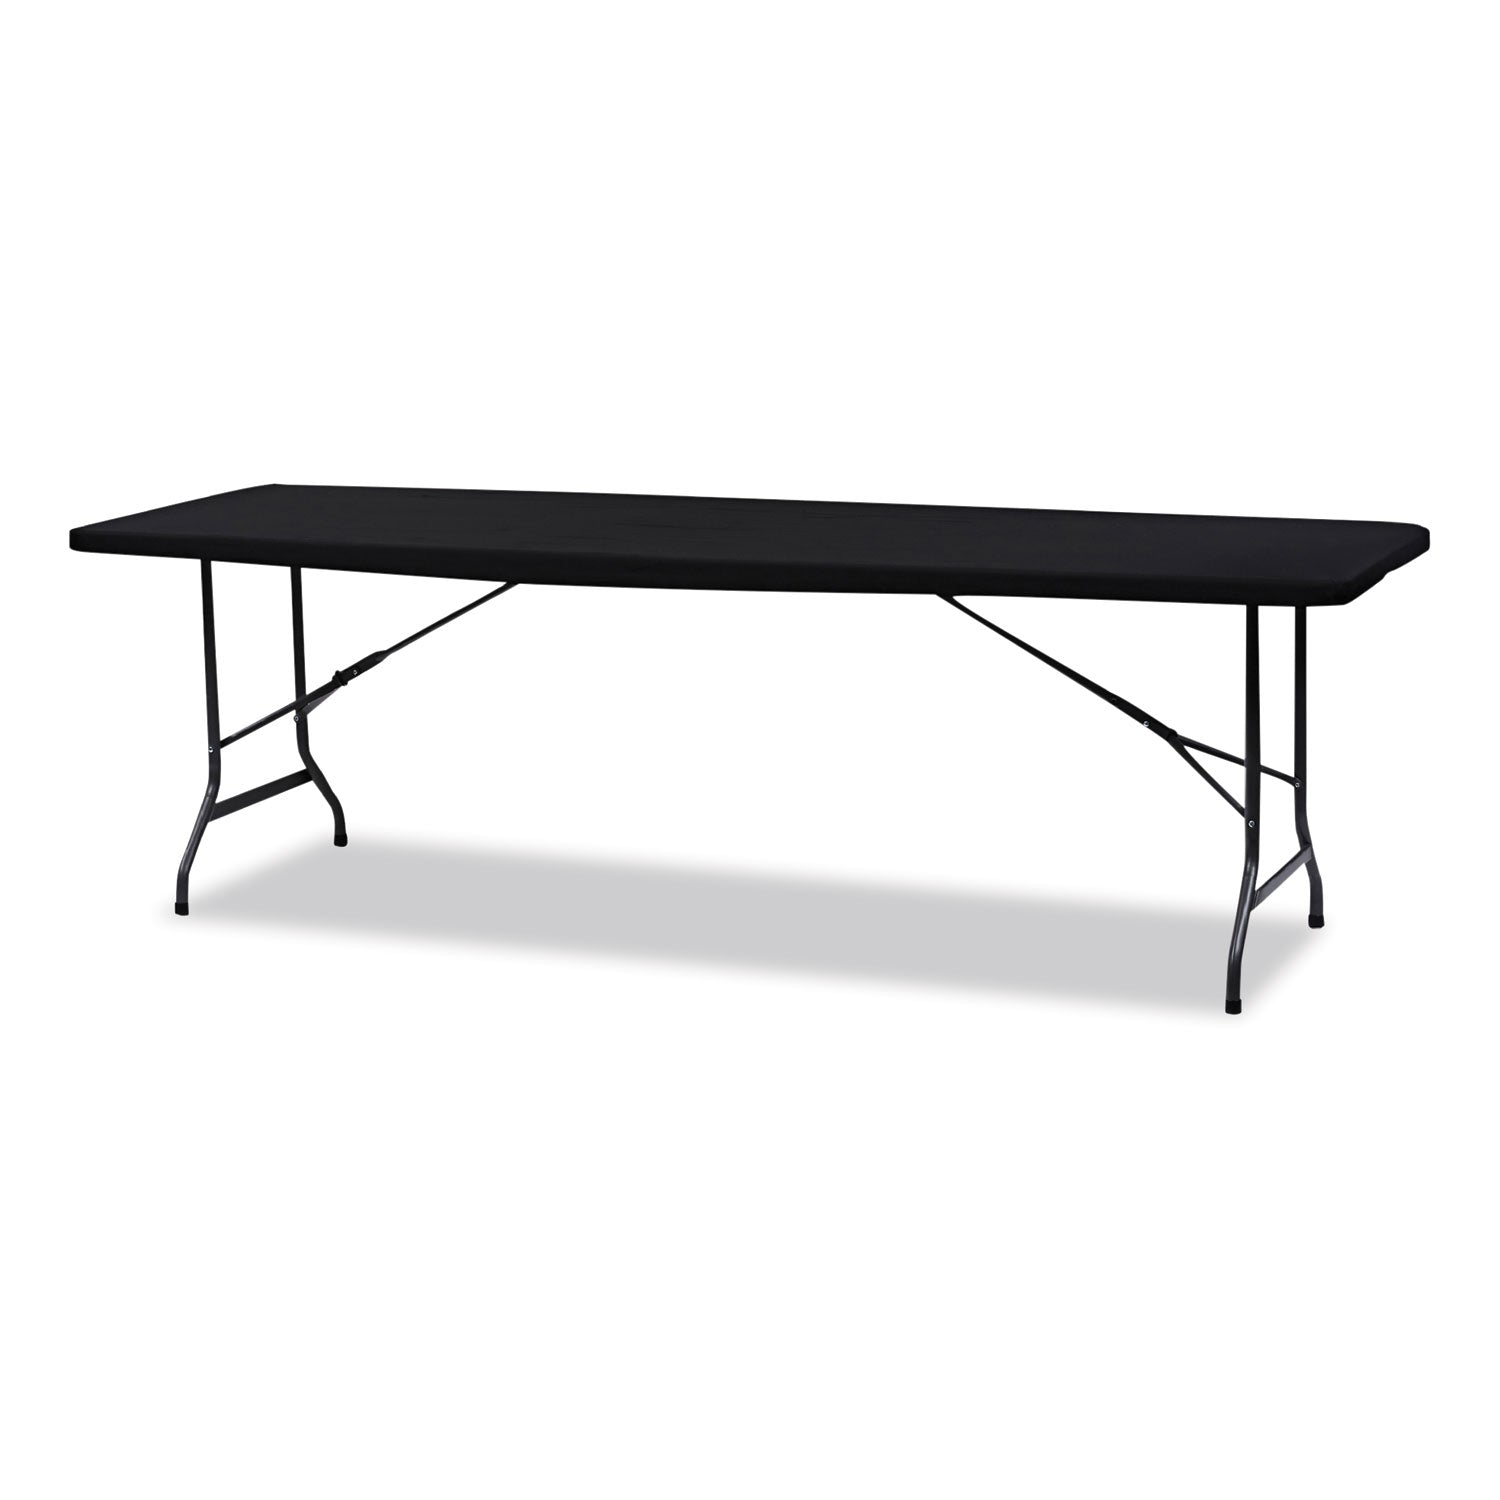 igear-fabric-table-top-cap-cover-polyester-30-x-96-black_ice16631 - 4